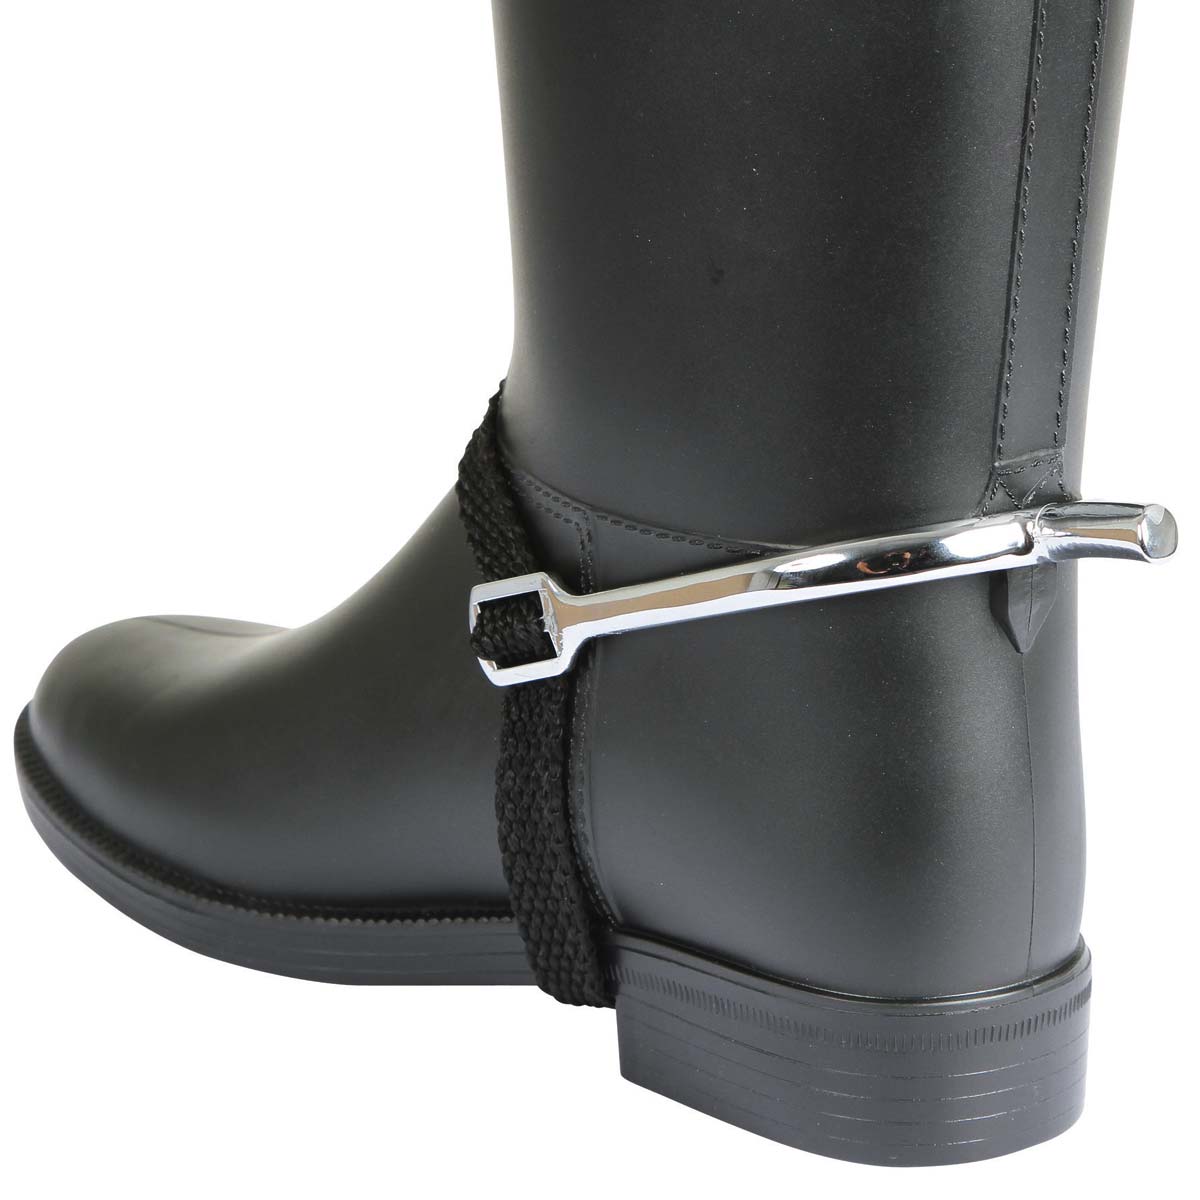 Covalliero spurs straight with straps for women 15 mm